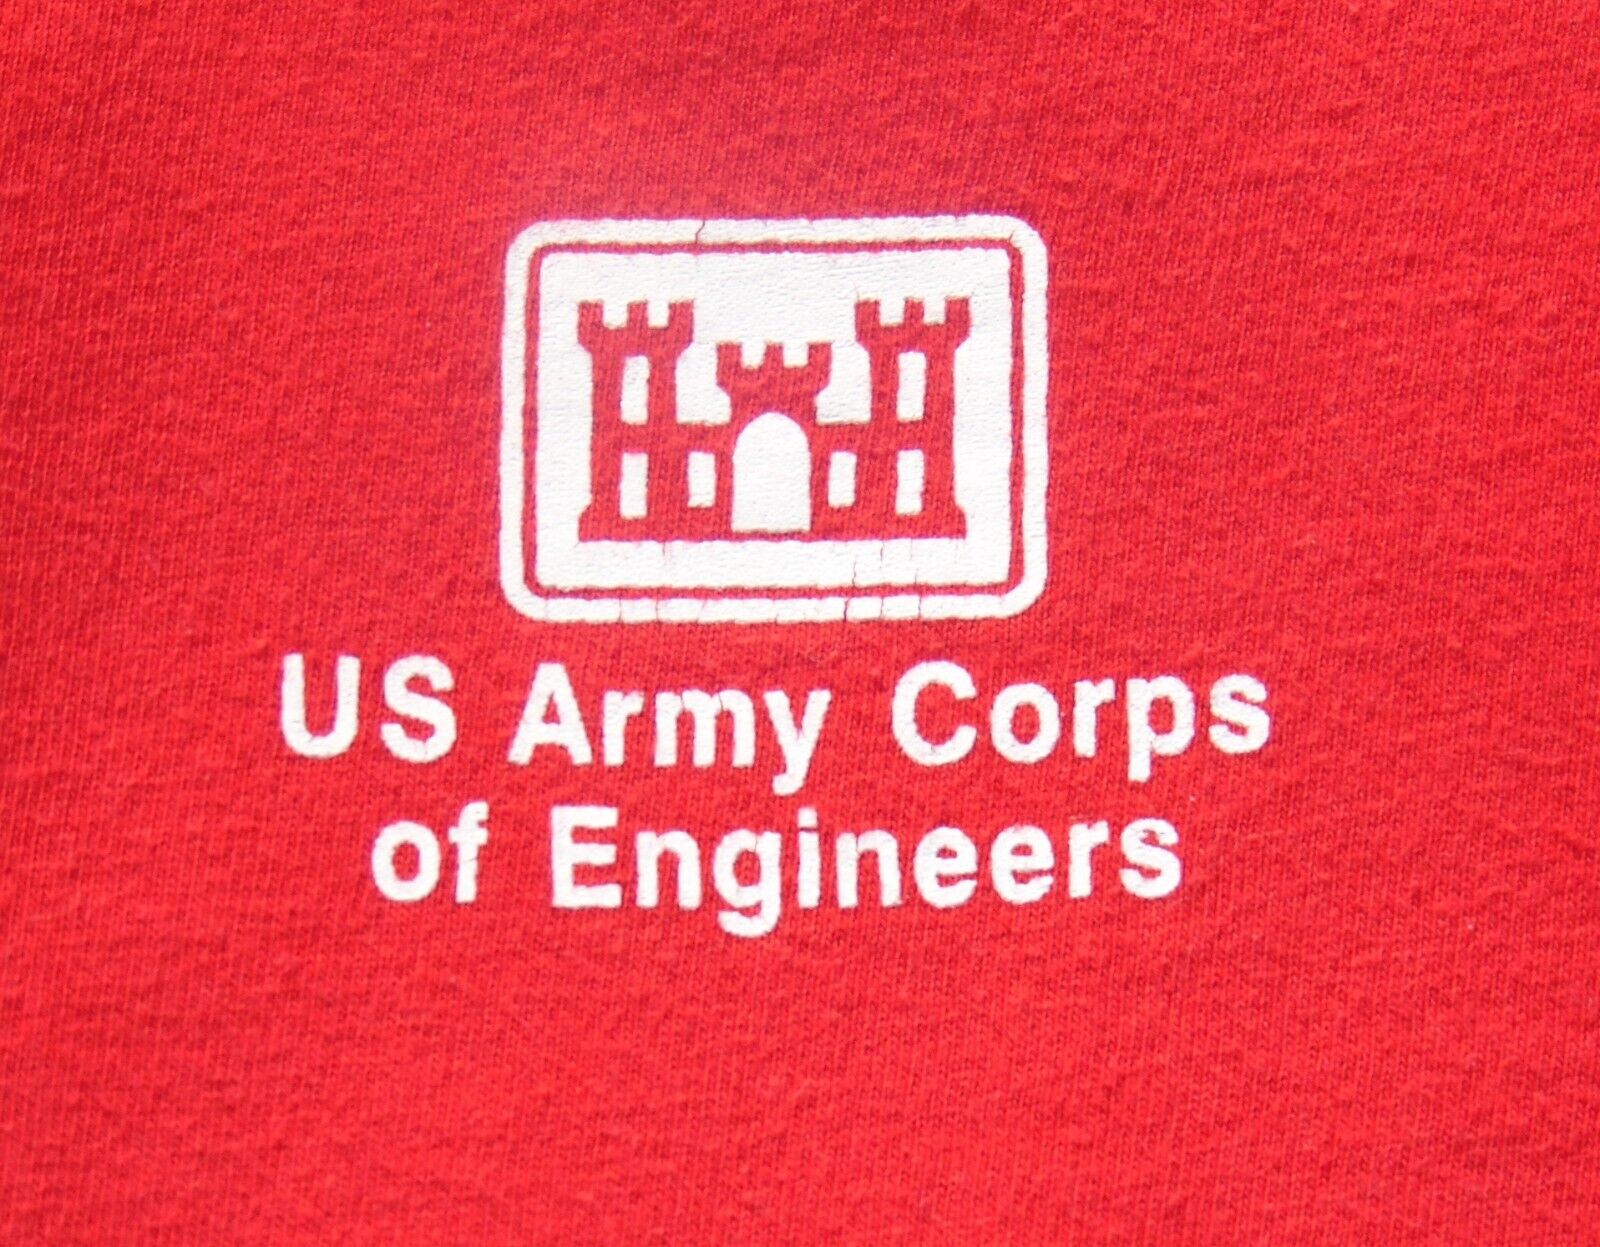 Vintage Official US Army Corps of Engineer T-Shirt; Deployed Worn